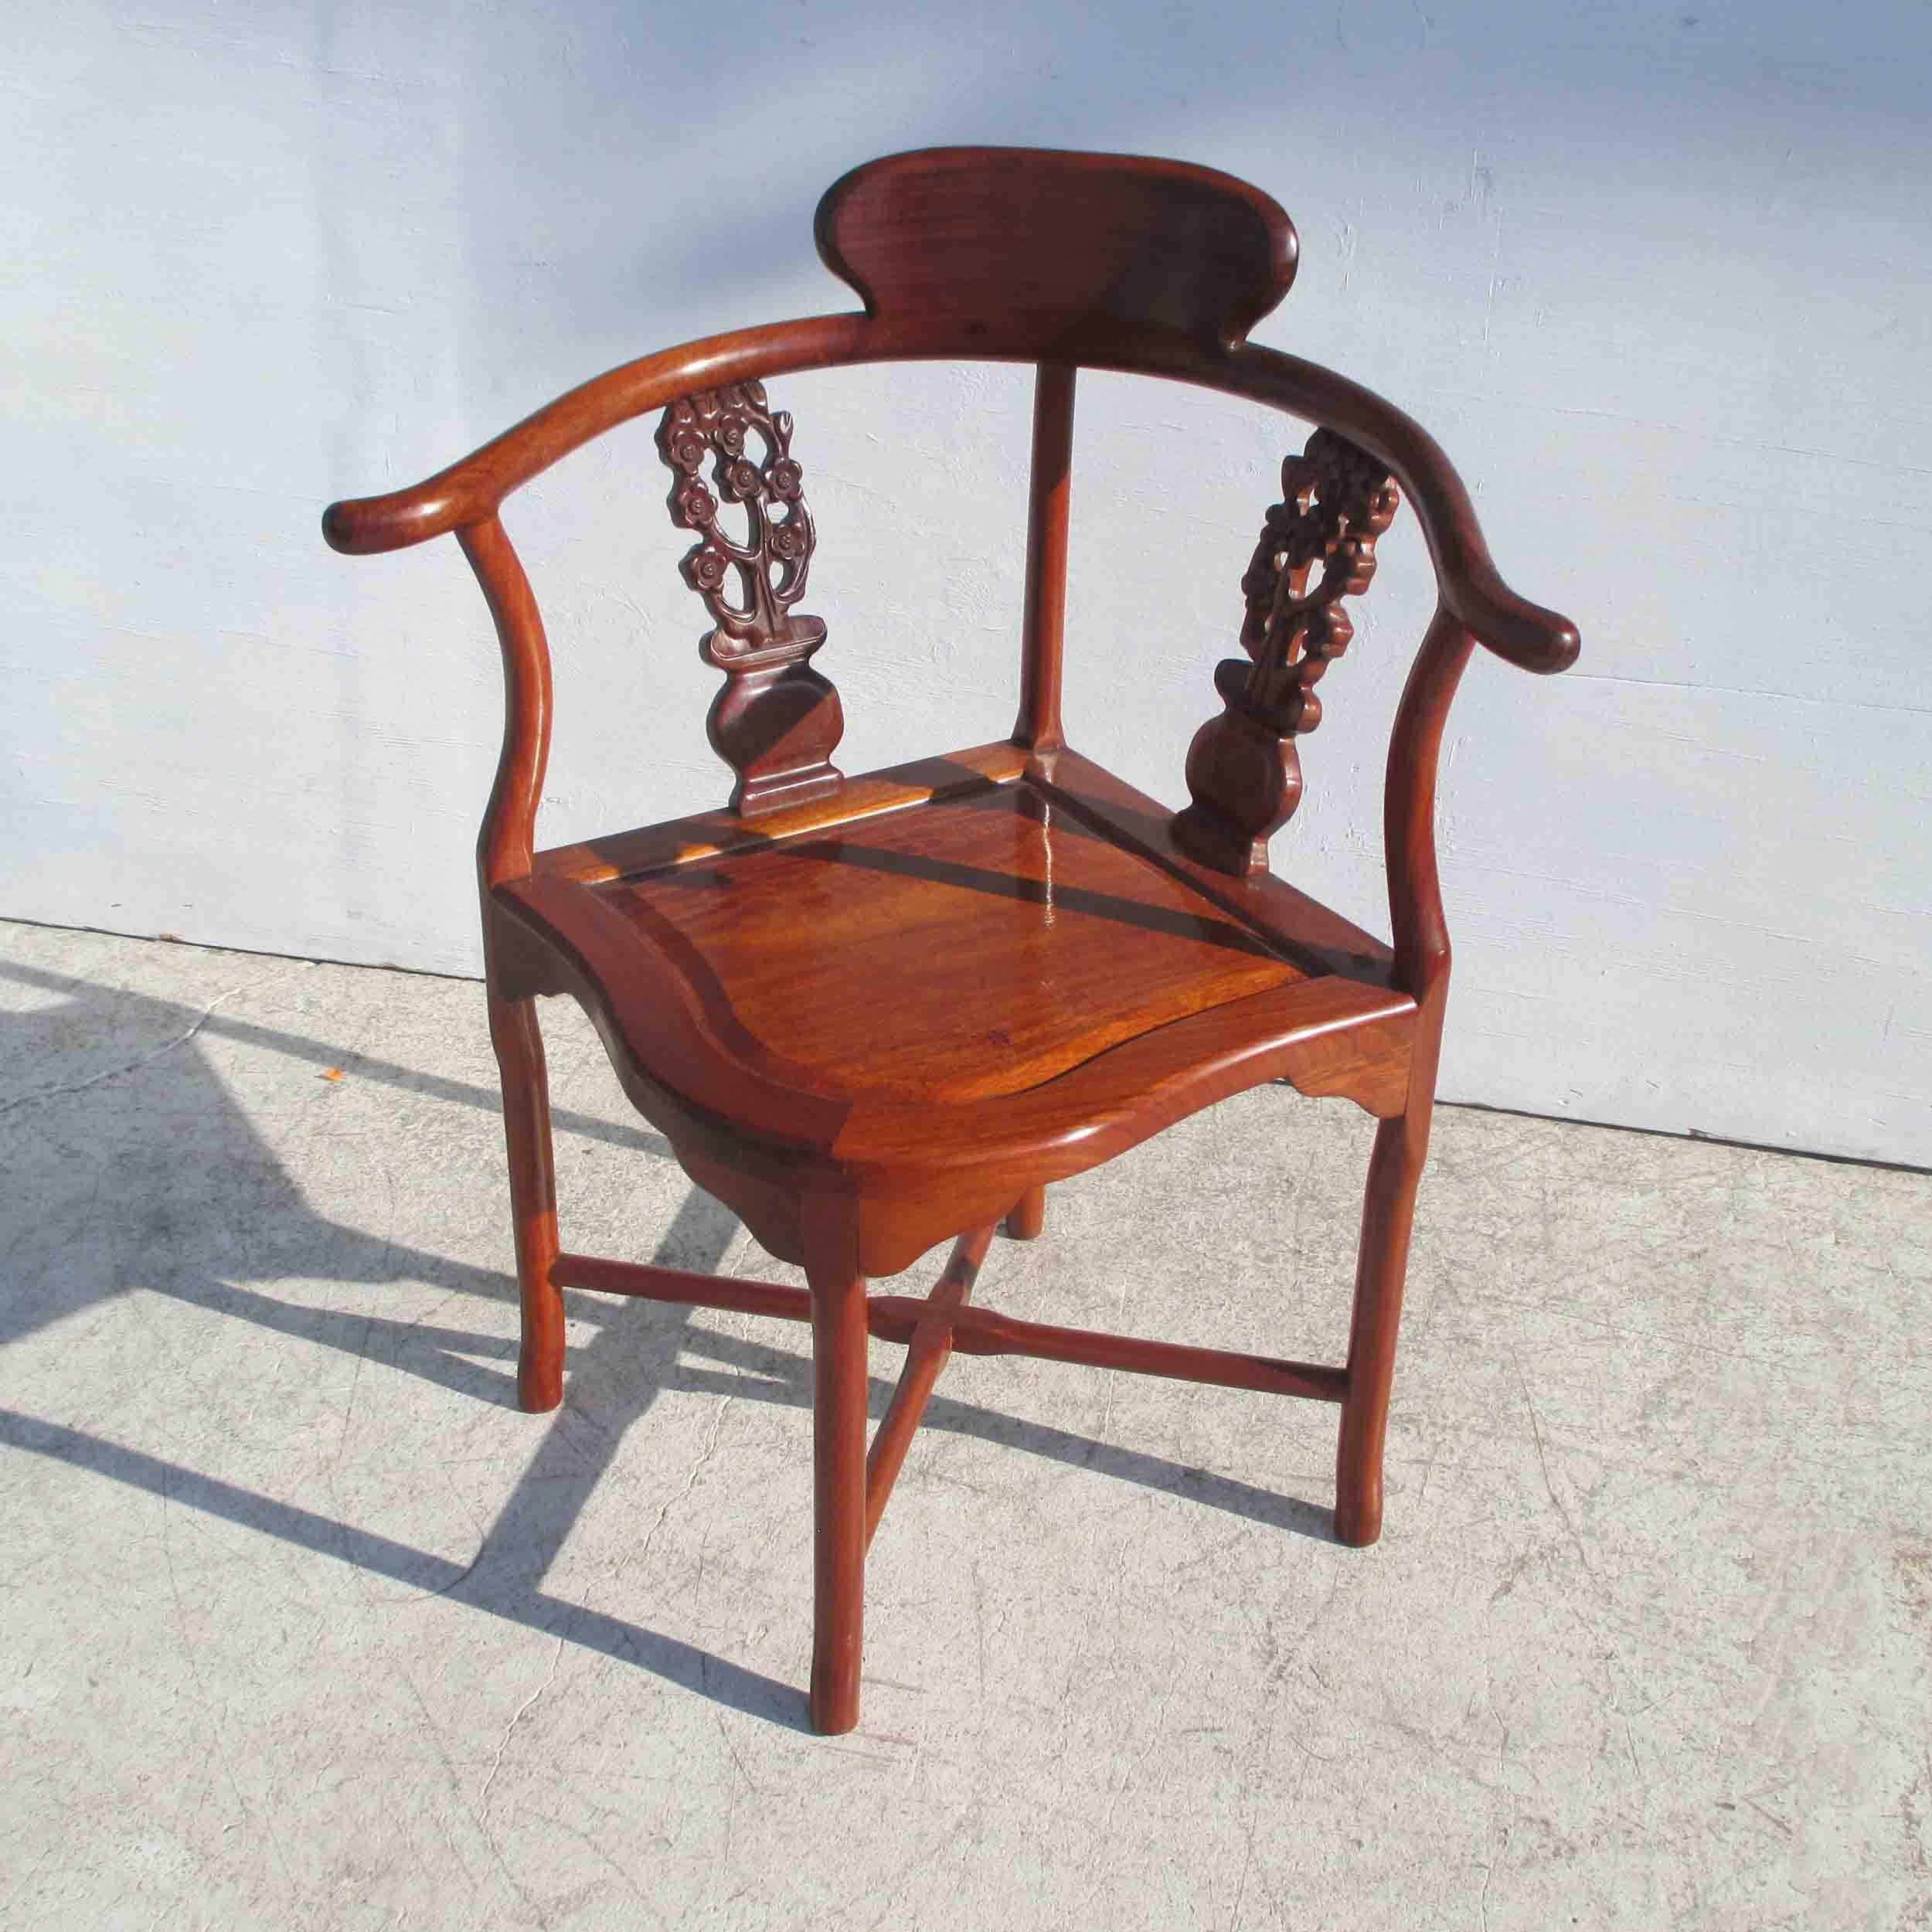 Vintage Chinoiserie rosewood corner chair

Lovely rosewood chair with intricately carved floral motifs.

Measures: 27 Width x 22  Depth x 32  Height
Seat Height 16.5 
   